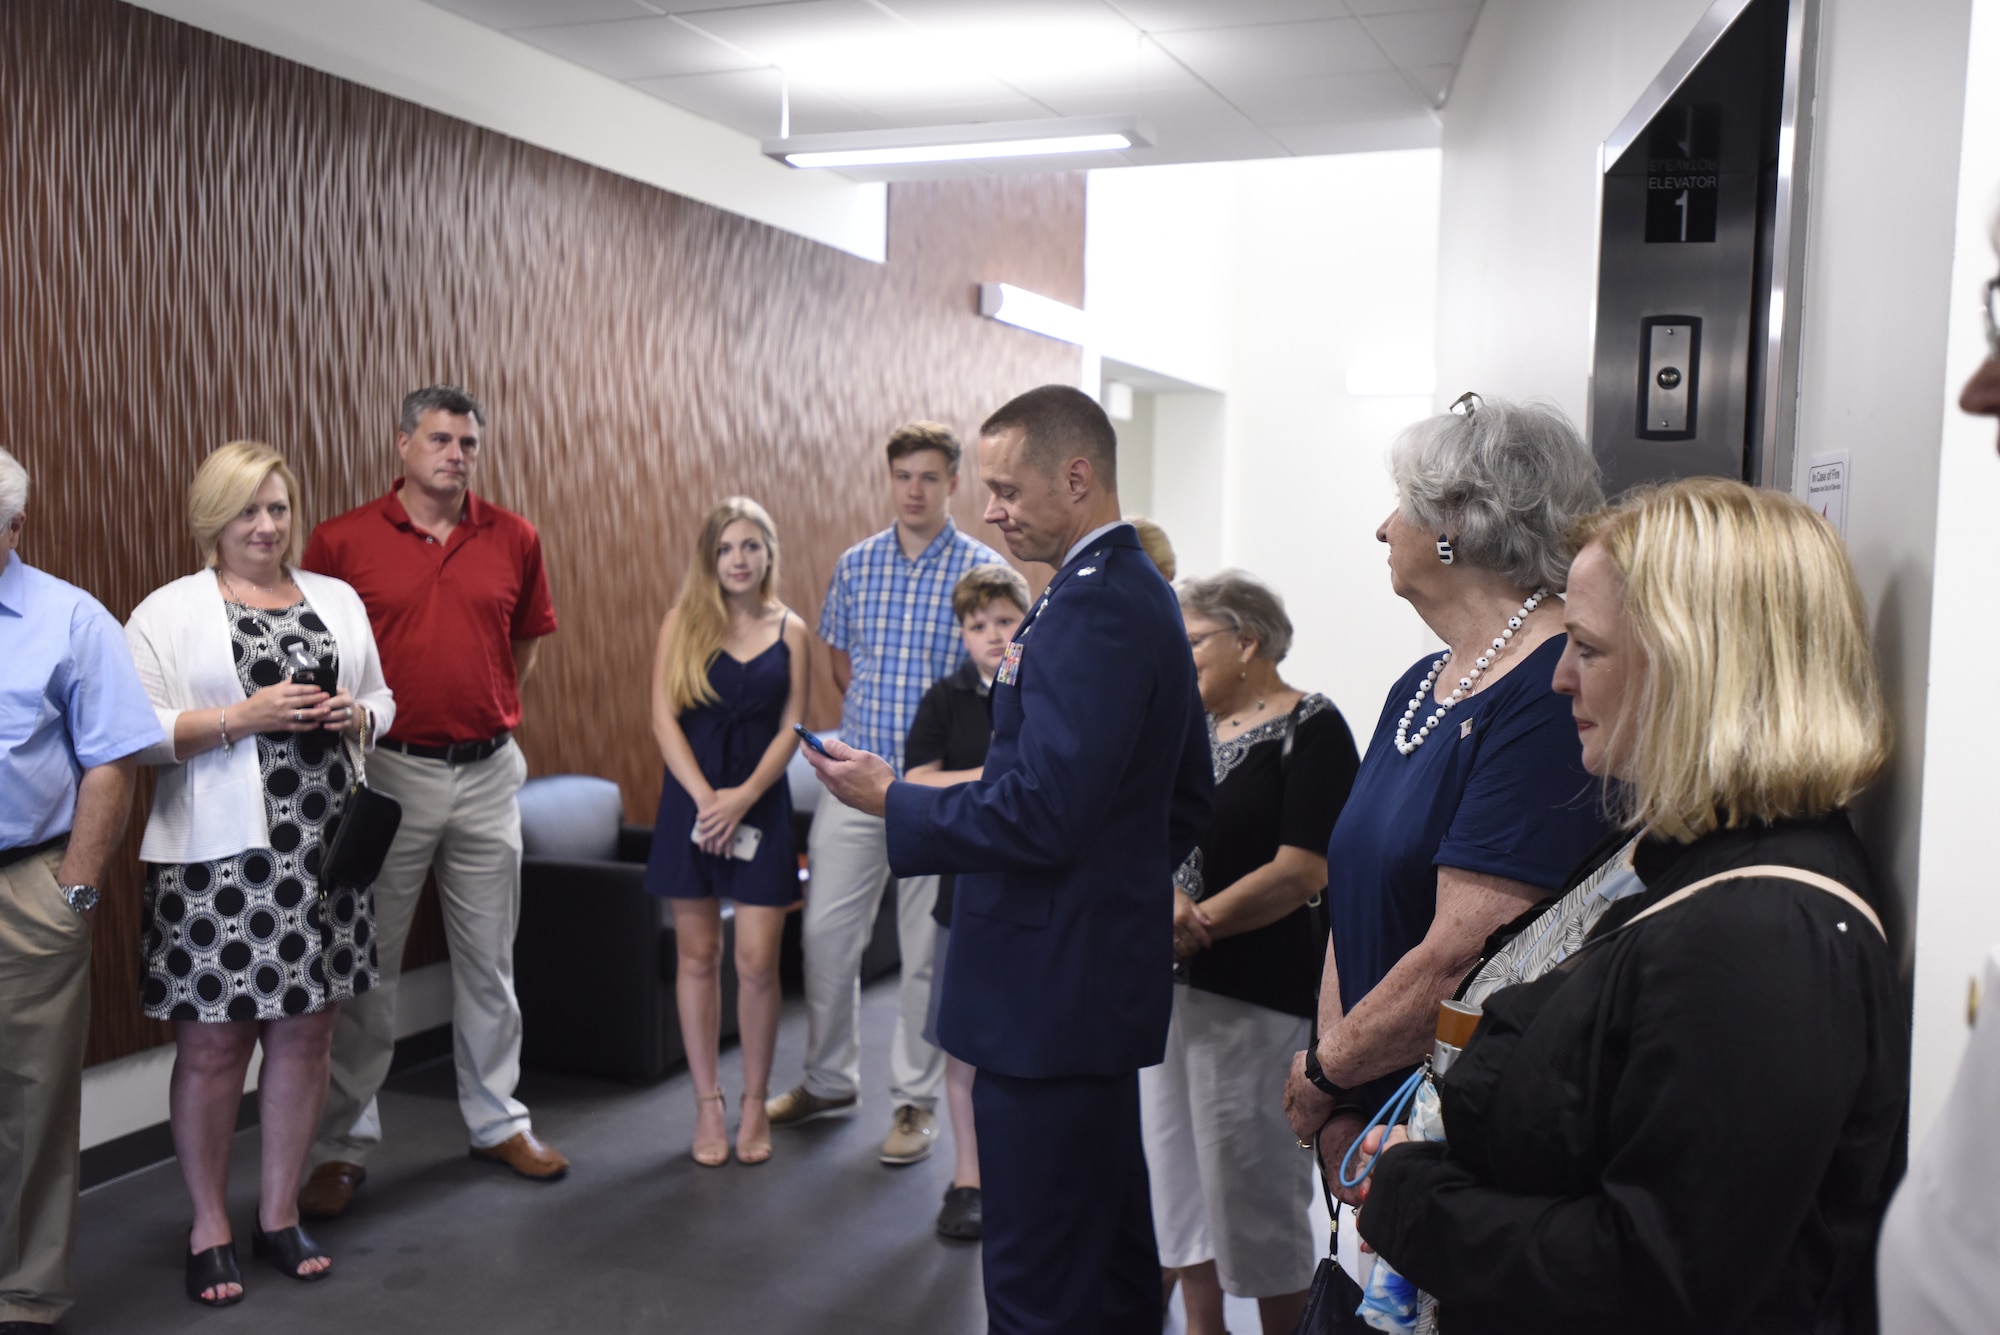 U.S. Air Force Lt. Col. James Pearson reads an emotional note to the family of Lt. Col. Joseph Mikeal, as they tour the 145th Airlift Wing’s new state of the art operations building that now shares his name, at the North Carolina Air National Guard Base, Charlotte Douglas International Airport, June 9, 2019. Lt. Col. Mikeal tragically lost his life alongside 3 other C-130 crew members in the MAFFS 7 aircraft accident in 2012, the 145th Airlift Wing honored his and the other crew members sacrifice by naming four buildings across the wing after each one.